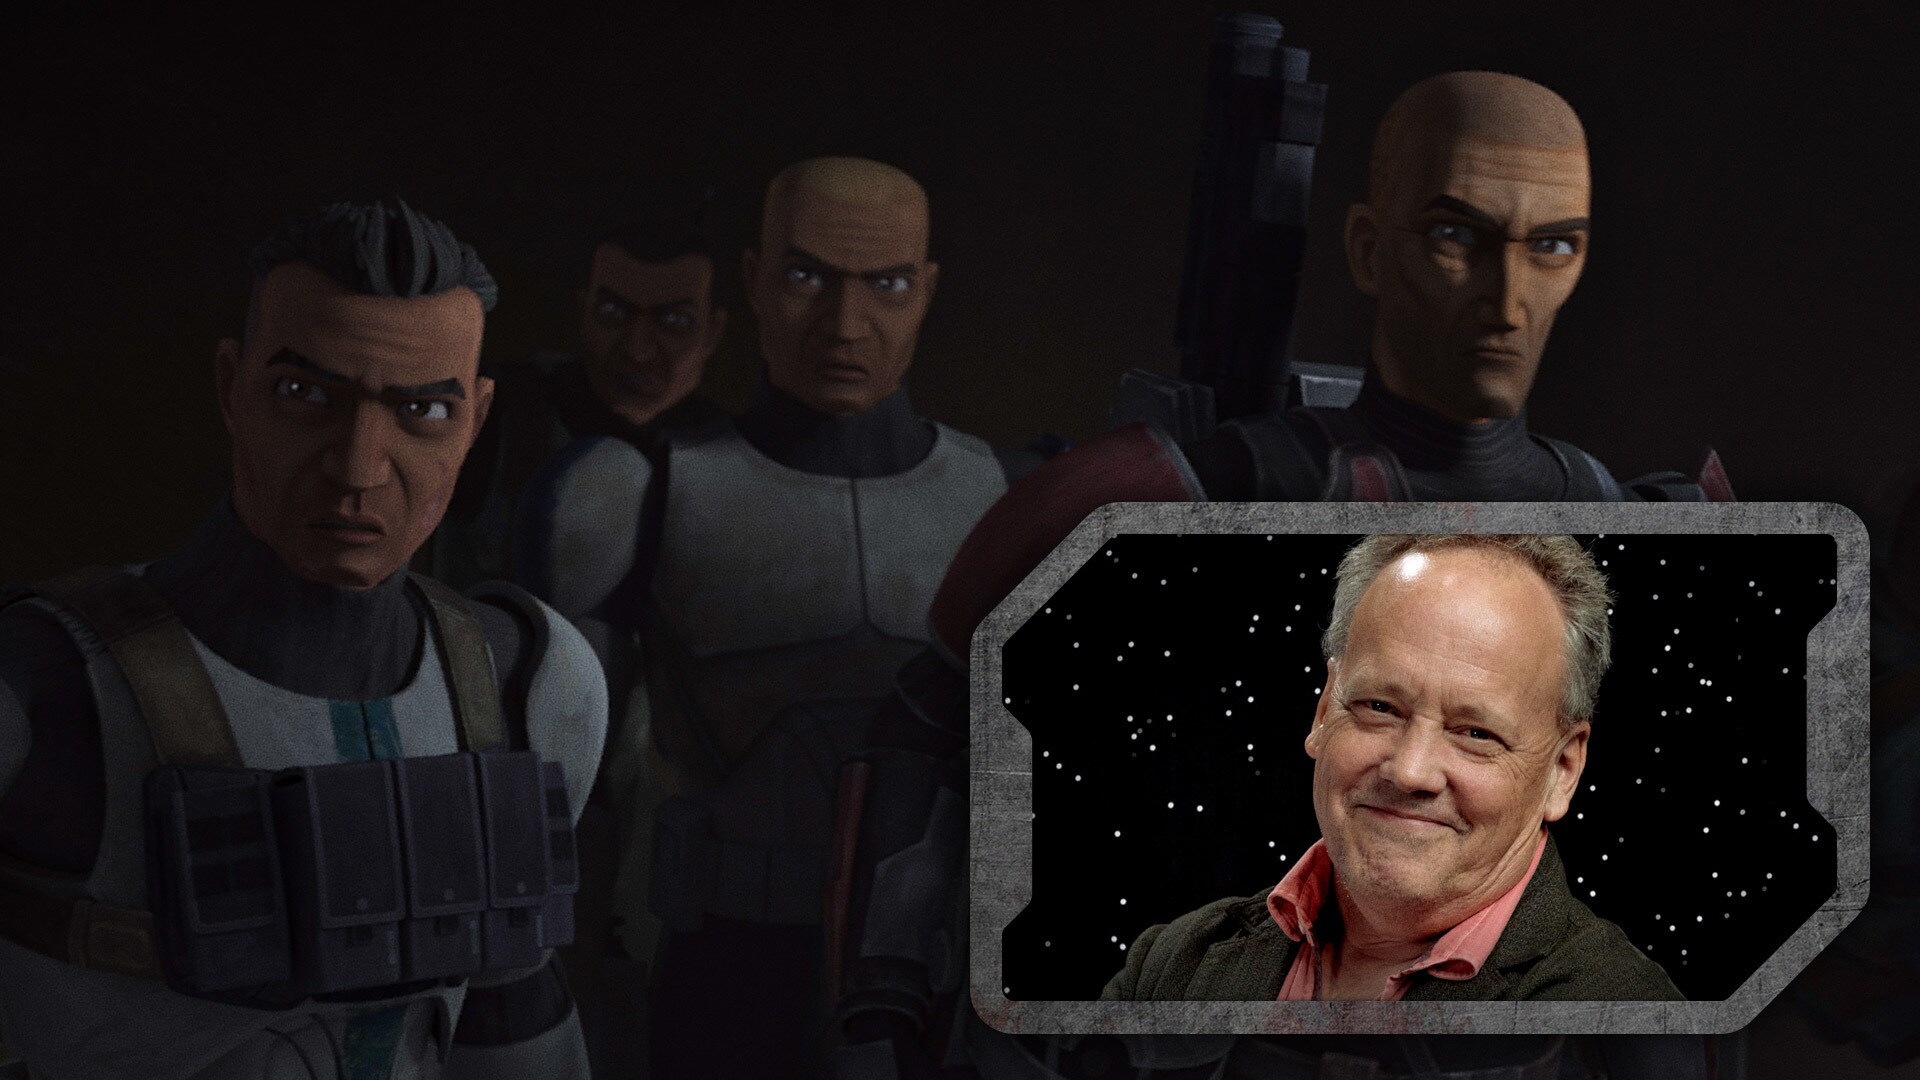 In this episode we get our best look at Rex’s clone resistance group, which includes, among others, Howzer (previously seen in Season 1’s “Devil’s Deal”), Nemec (seen in Season 2’s “Tipping Point"), and a new clone called Greer. They are all, of course, voiced by Dee Bradley Baker.